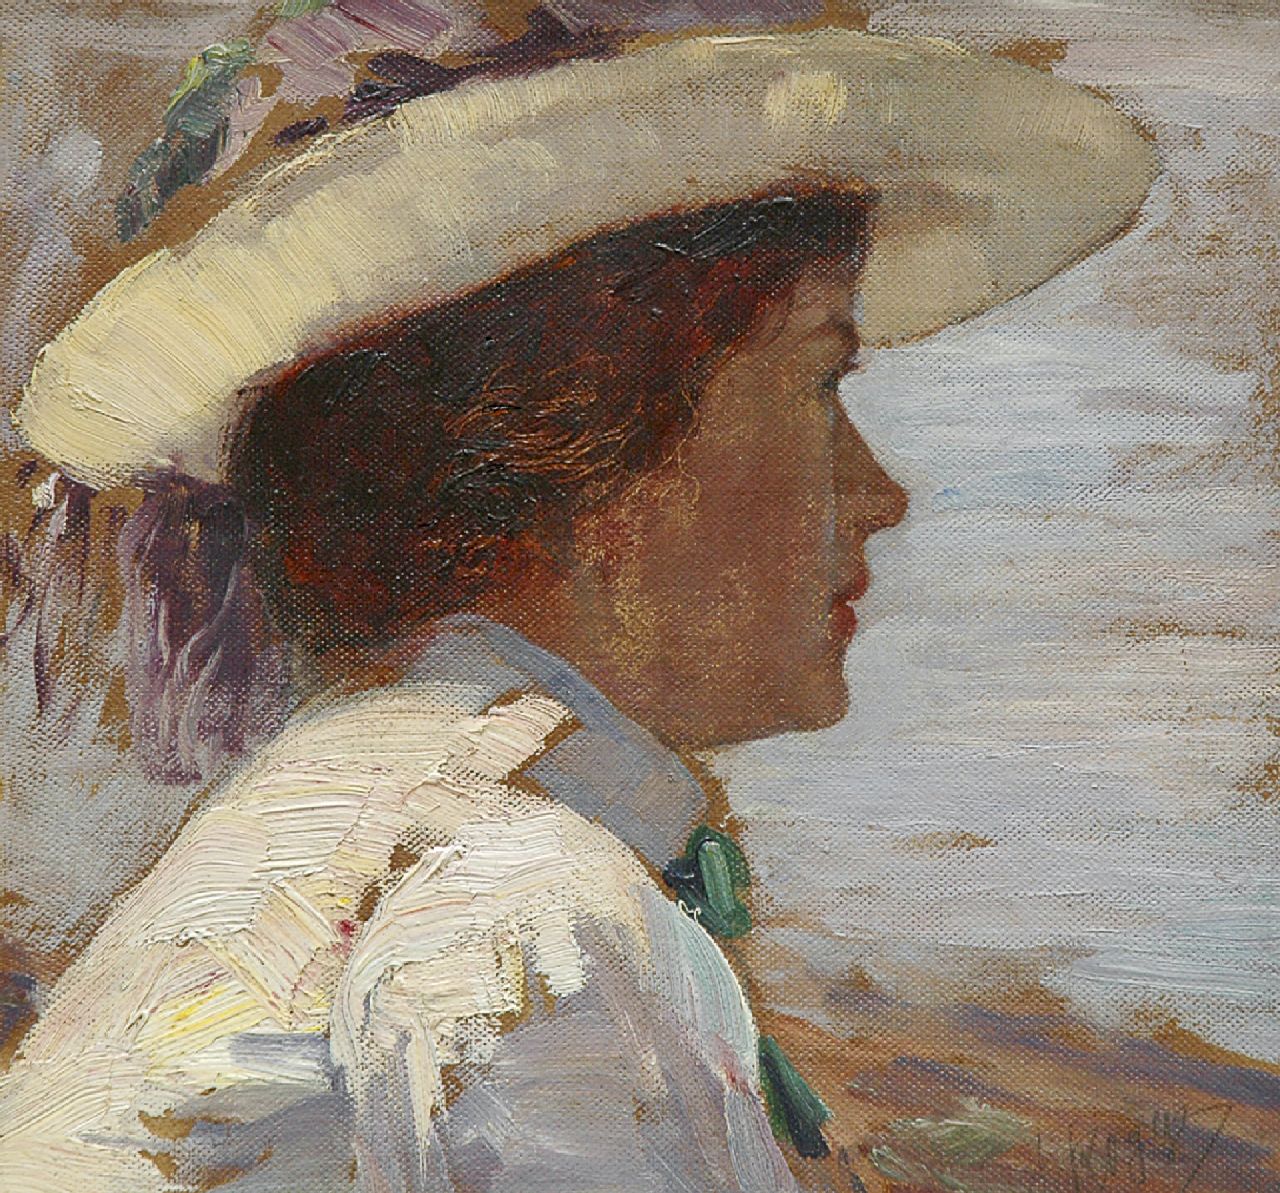 Adalbert Rogge | Lady with hat looking out over the sea, Öl auf Holzfaser, 23,9 x 25,0 cm, signed l.r.